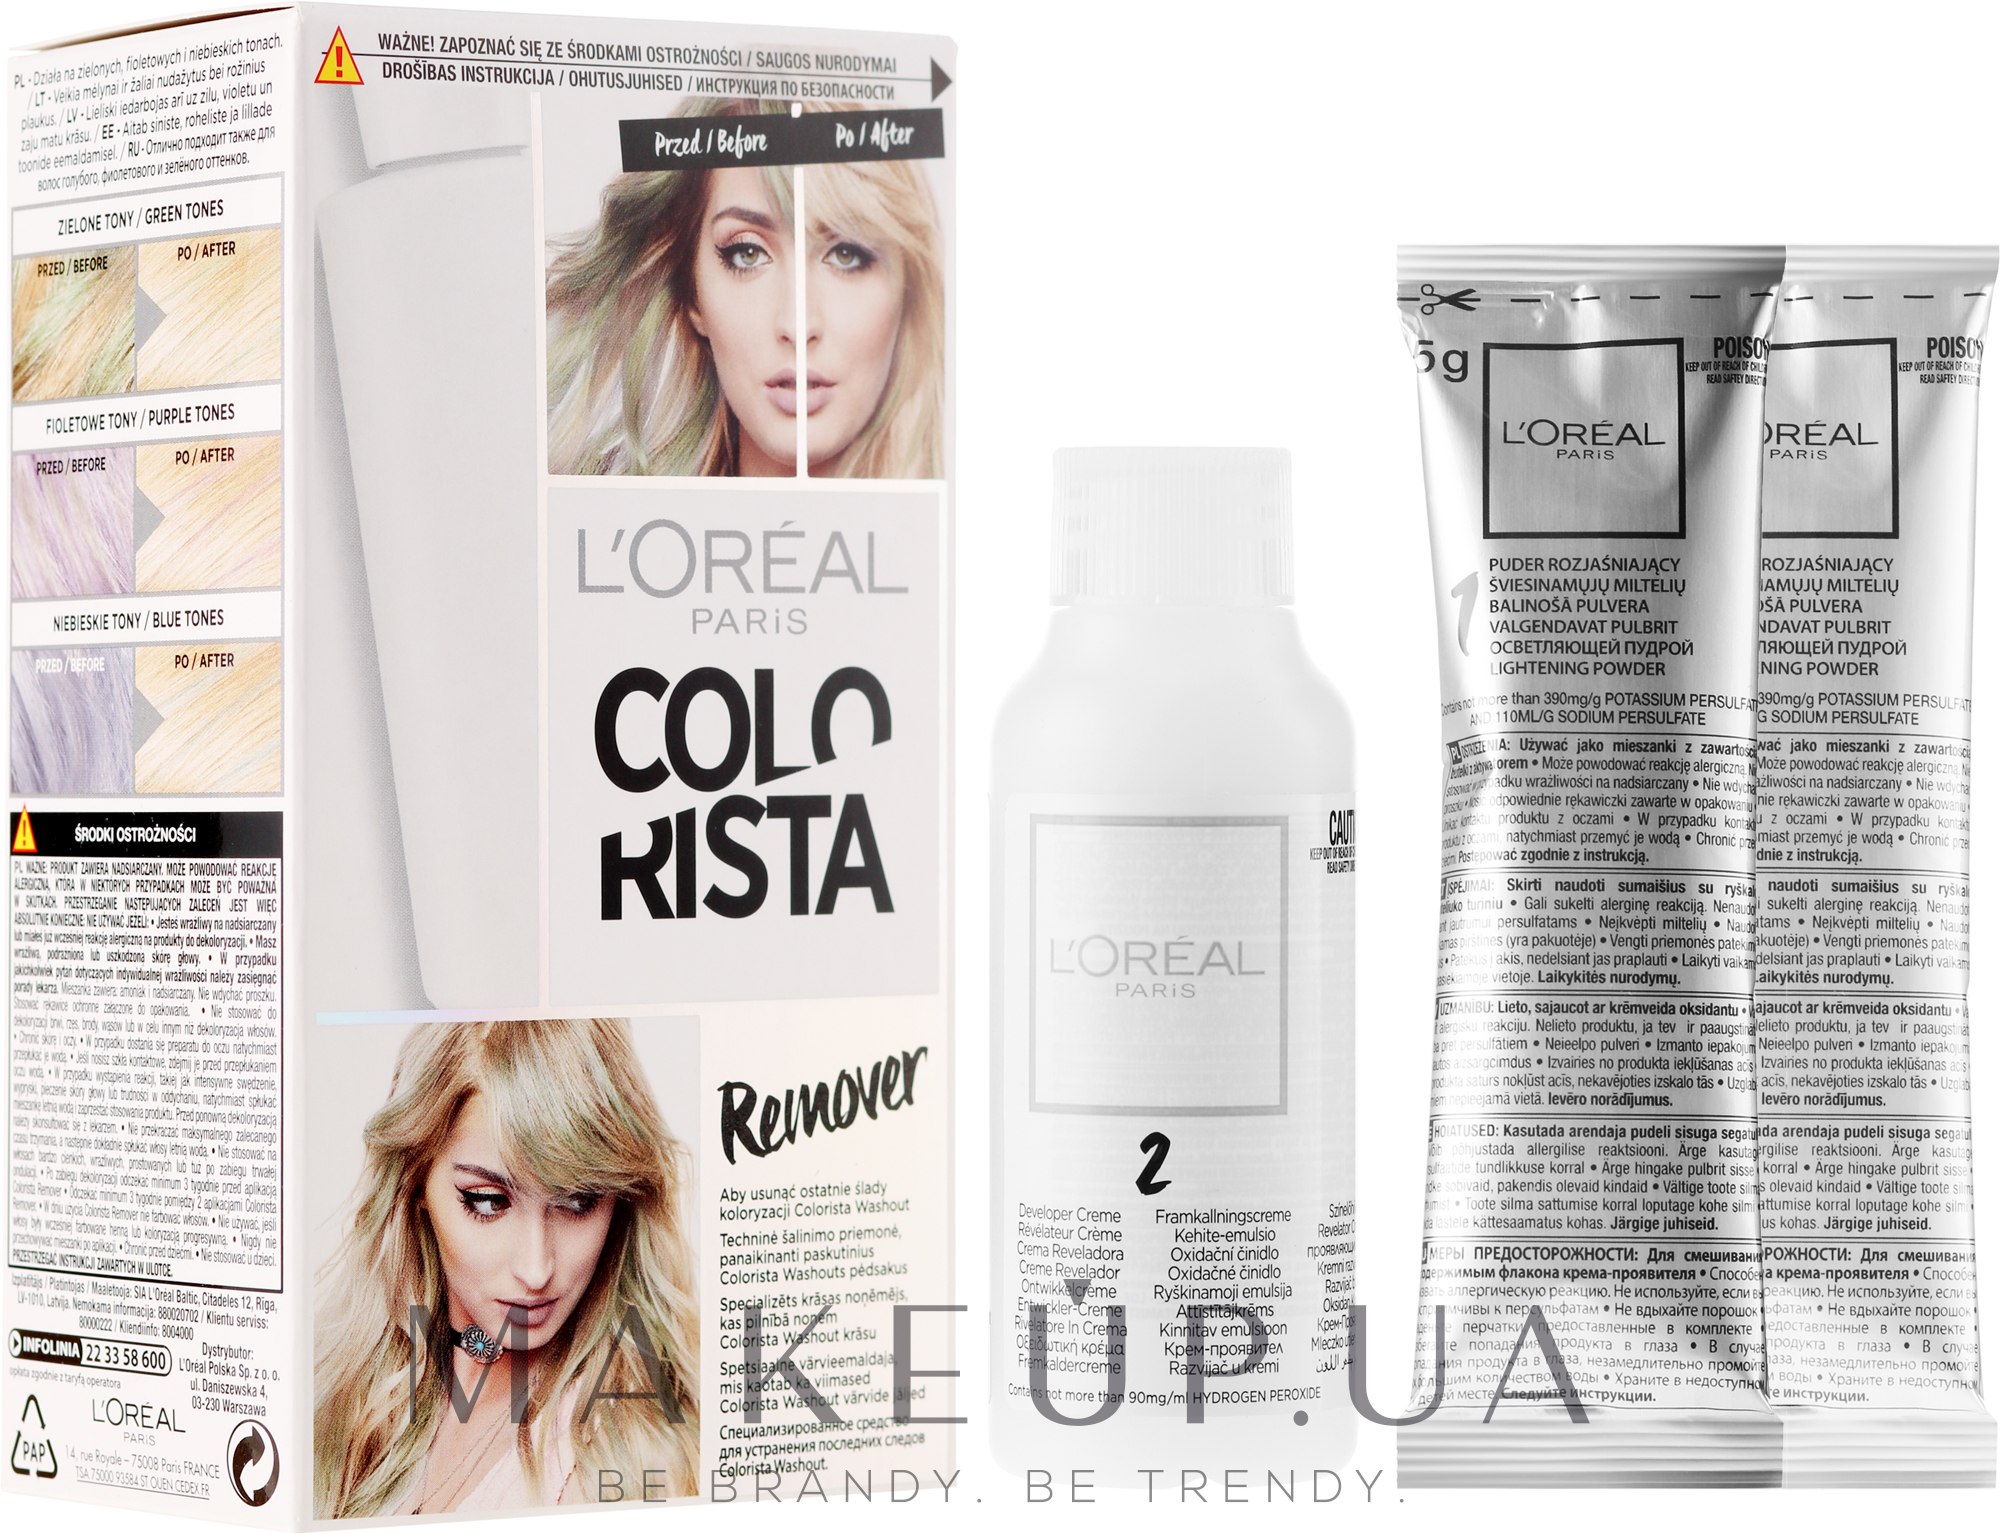 7. L'Oreal Paris Colorista Hair Makeup Temporary 1-Day Hair Color for Brunettes, Blue - wide 8